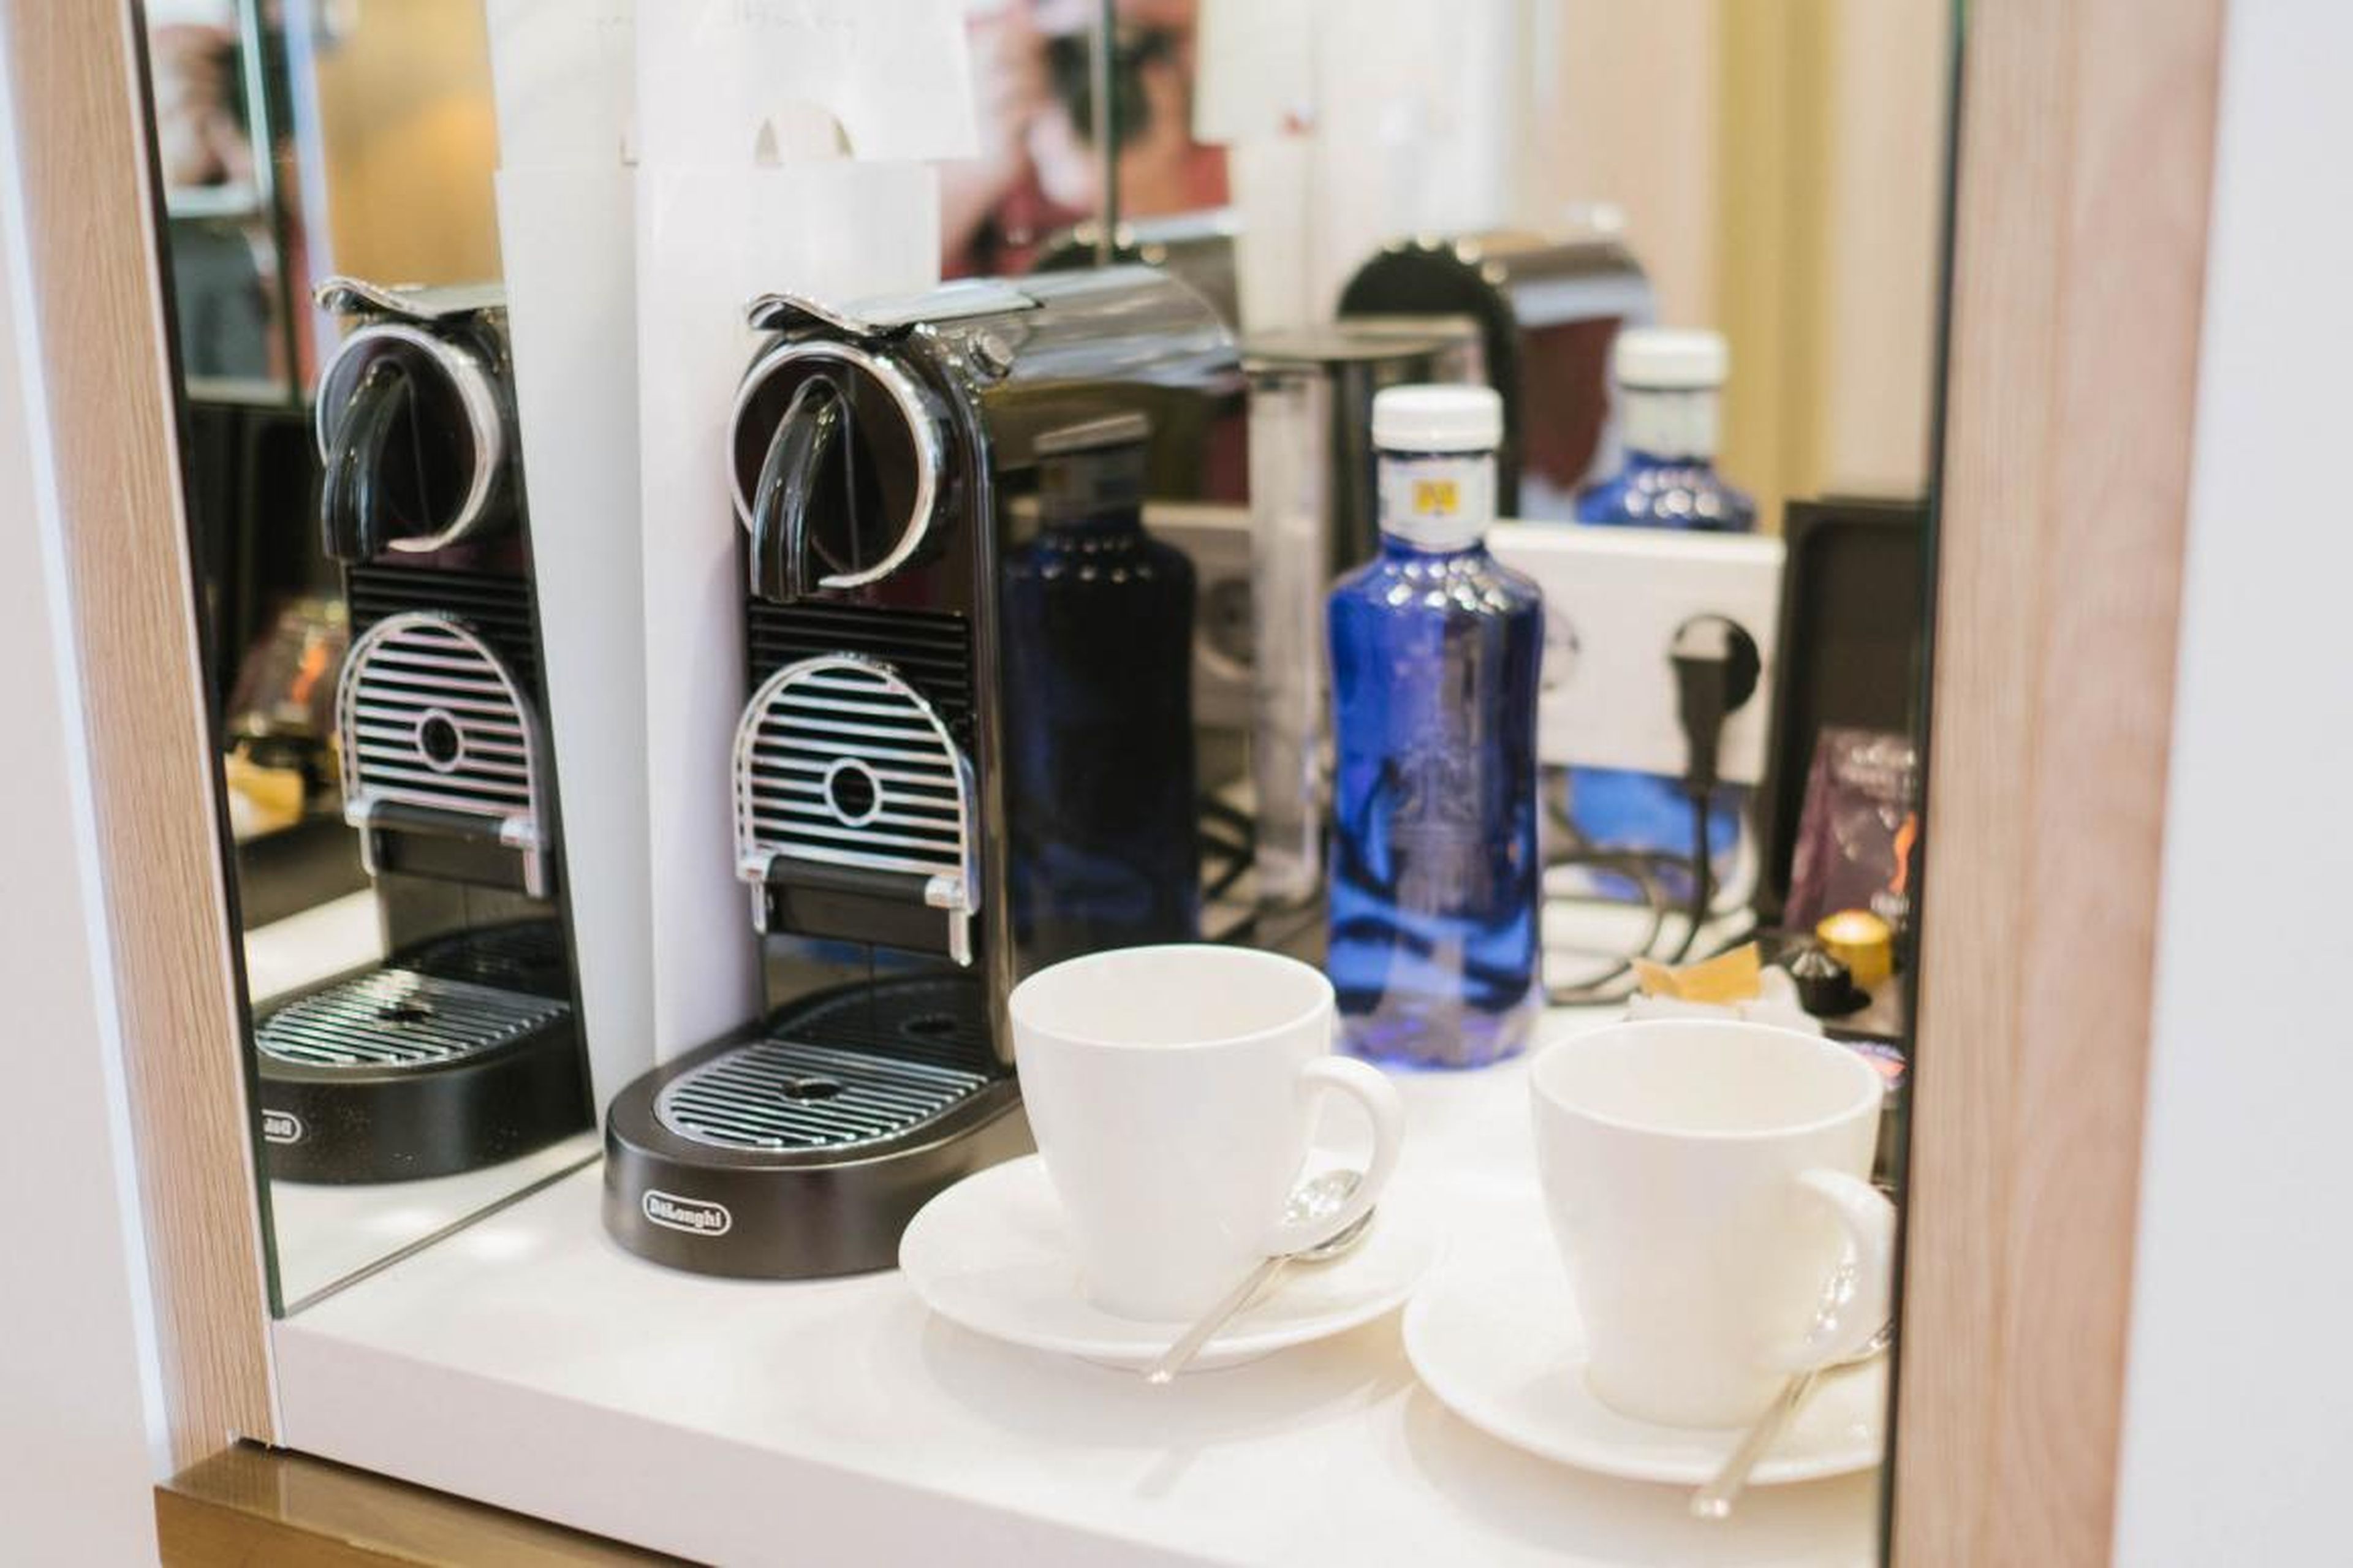 There are a few thoughtful amenities like this Nespresso machine that comes with pods so you can get your caffeine fix at any time.